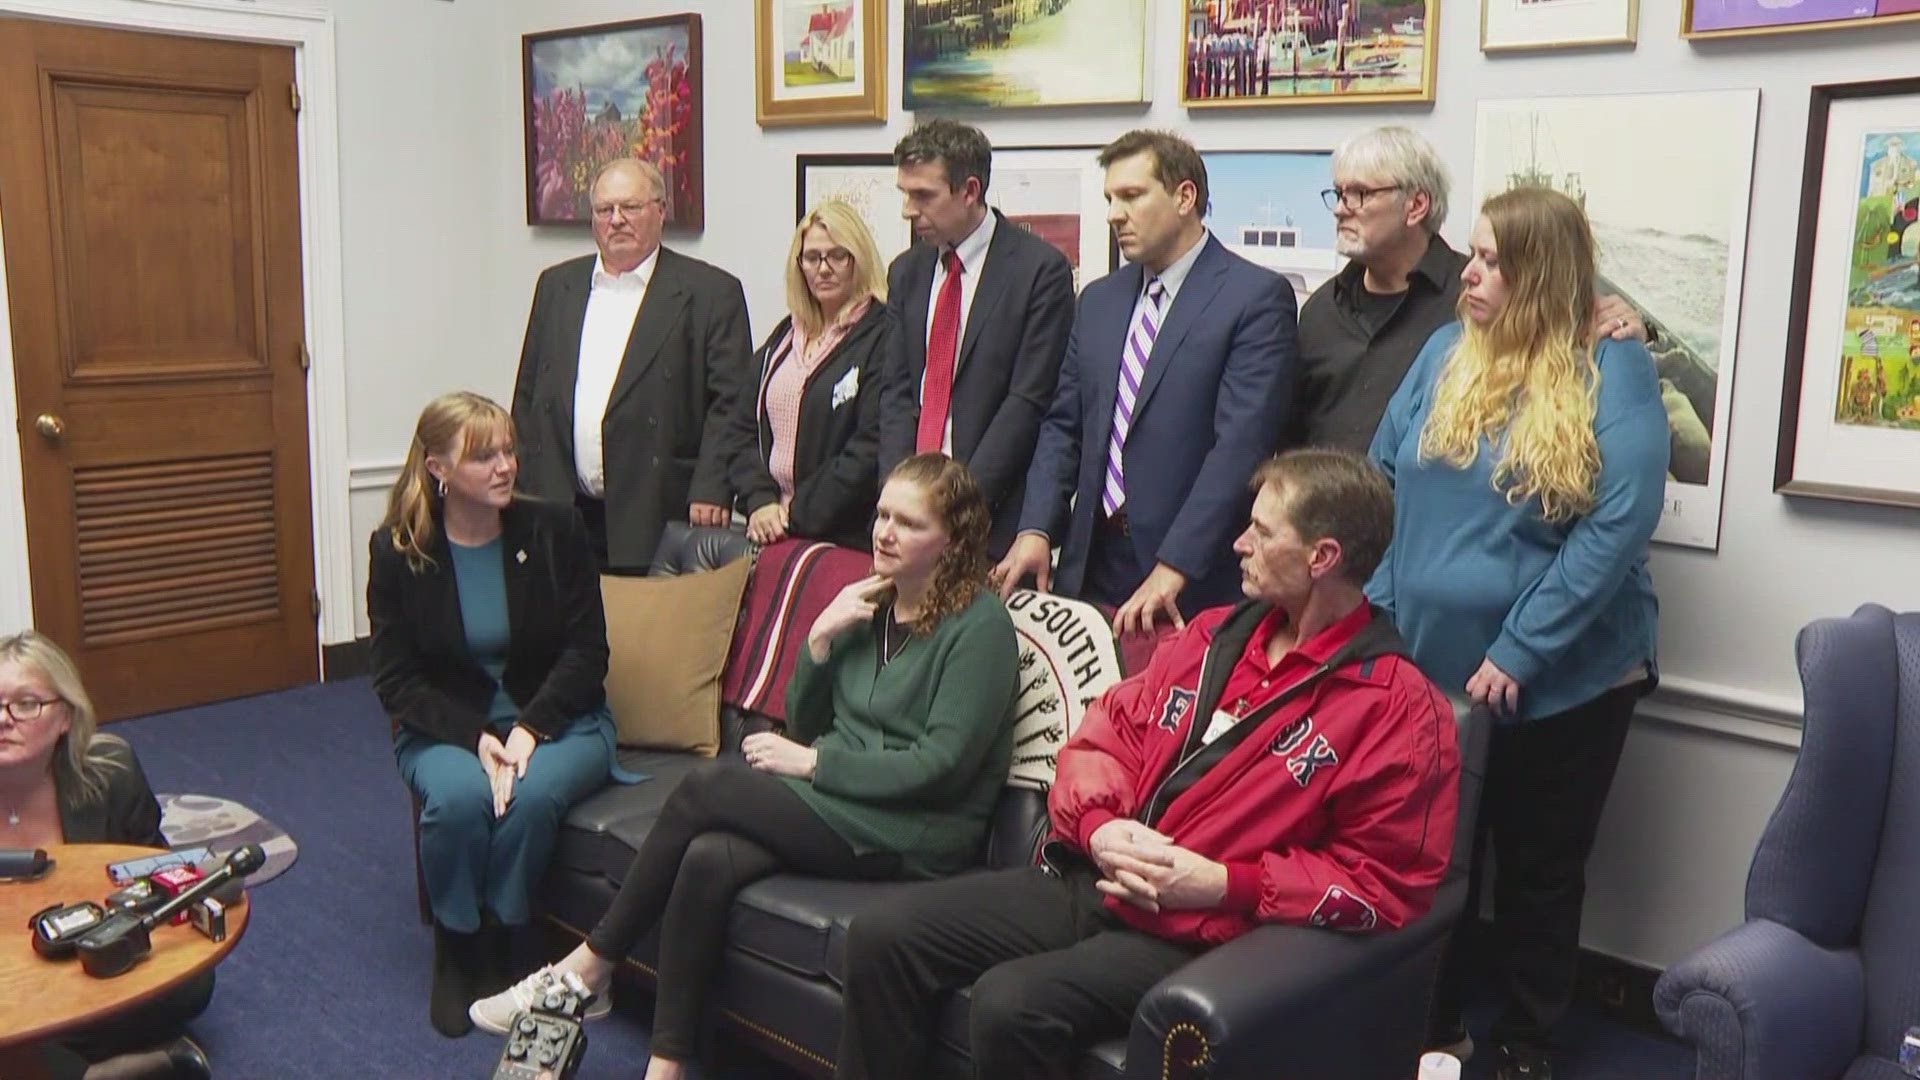 The families held a public conference after meeting with Sens. Angus King and Susan Collins and Reps. Jared Golden and Chellie Pingree.